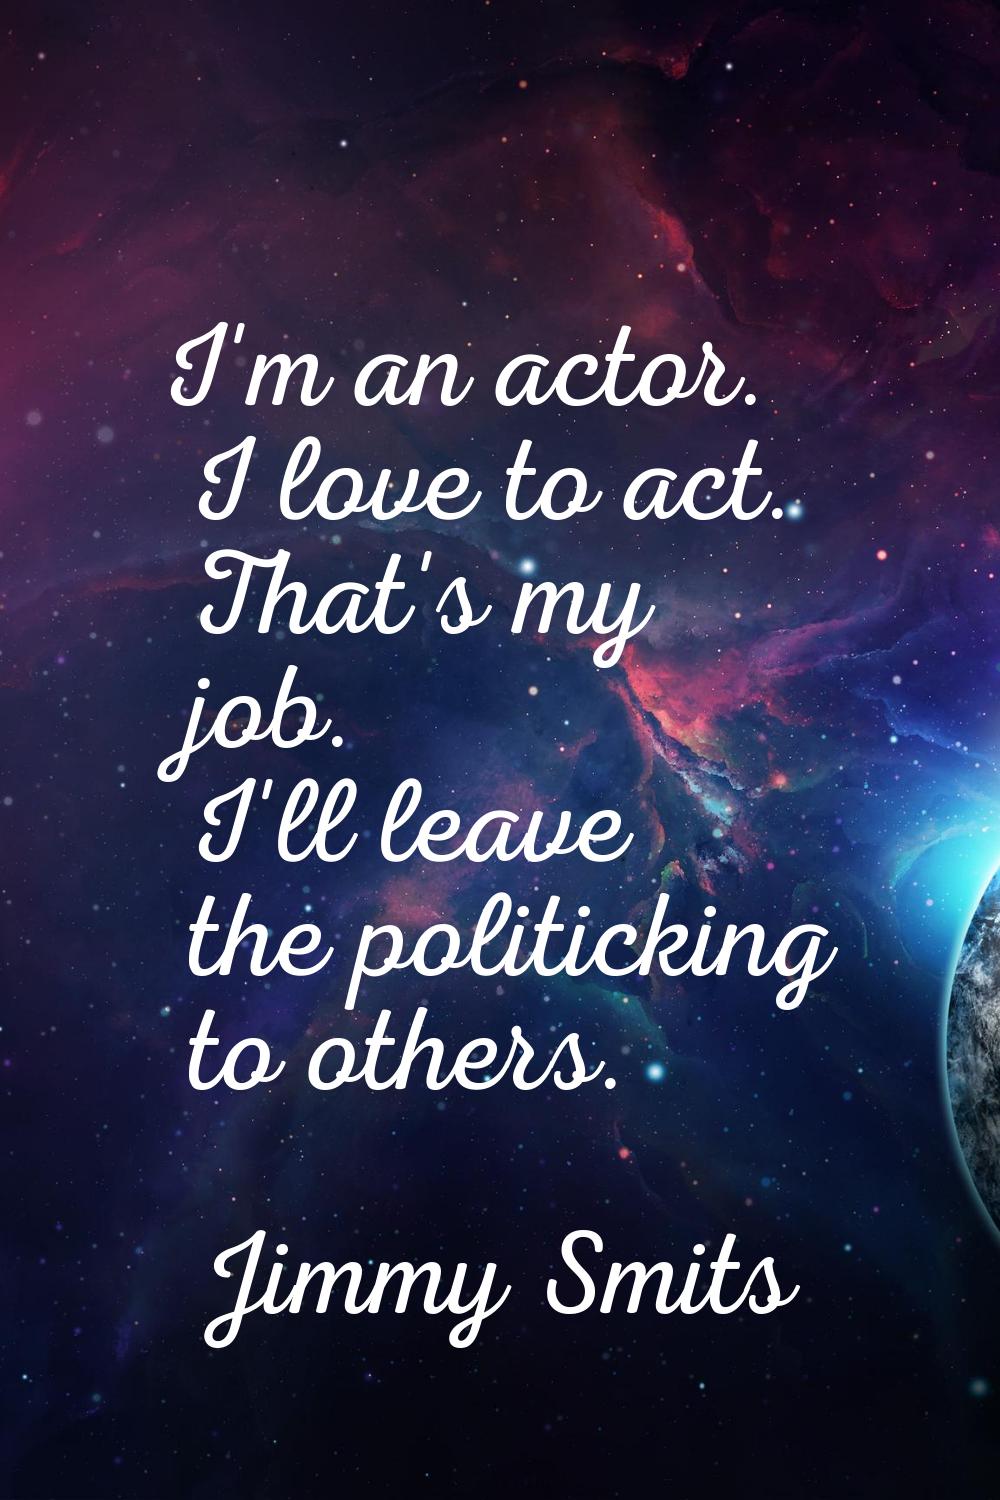 I'm an actor. I love to act. That's my job. I'll leave the politicking to others.